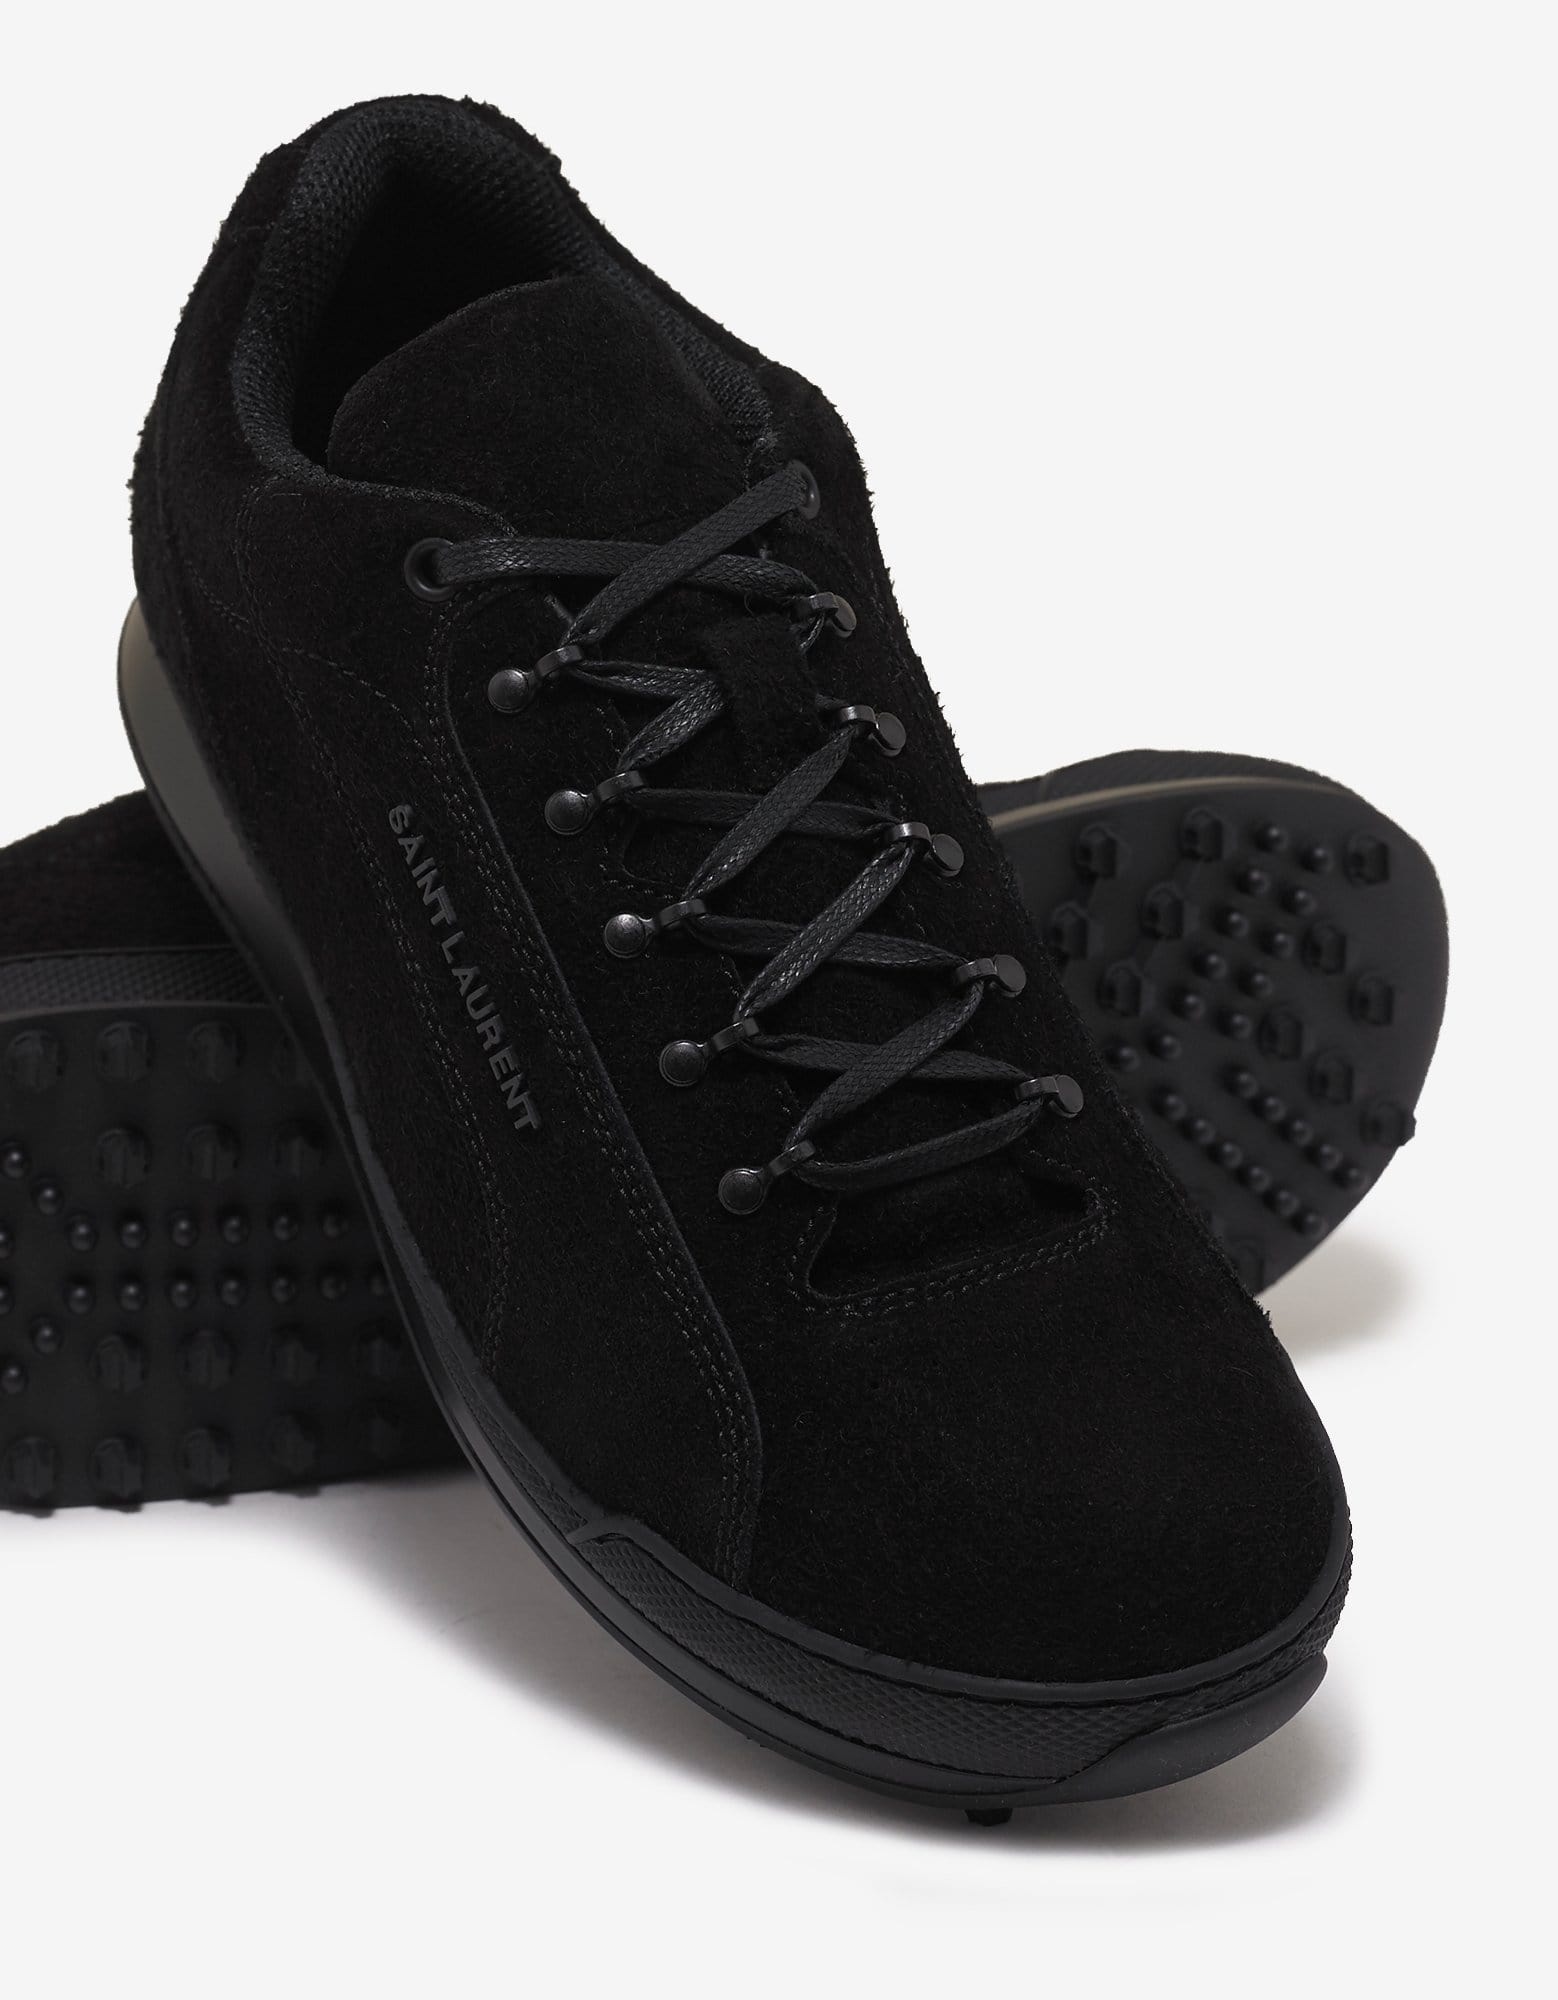 Black Suede Leather Jump Trainers - 7